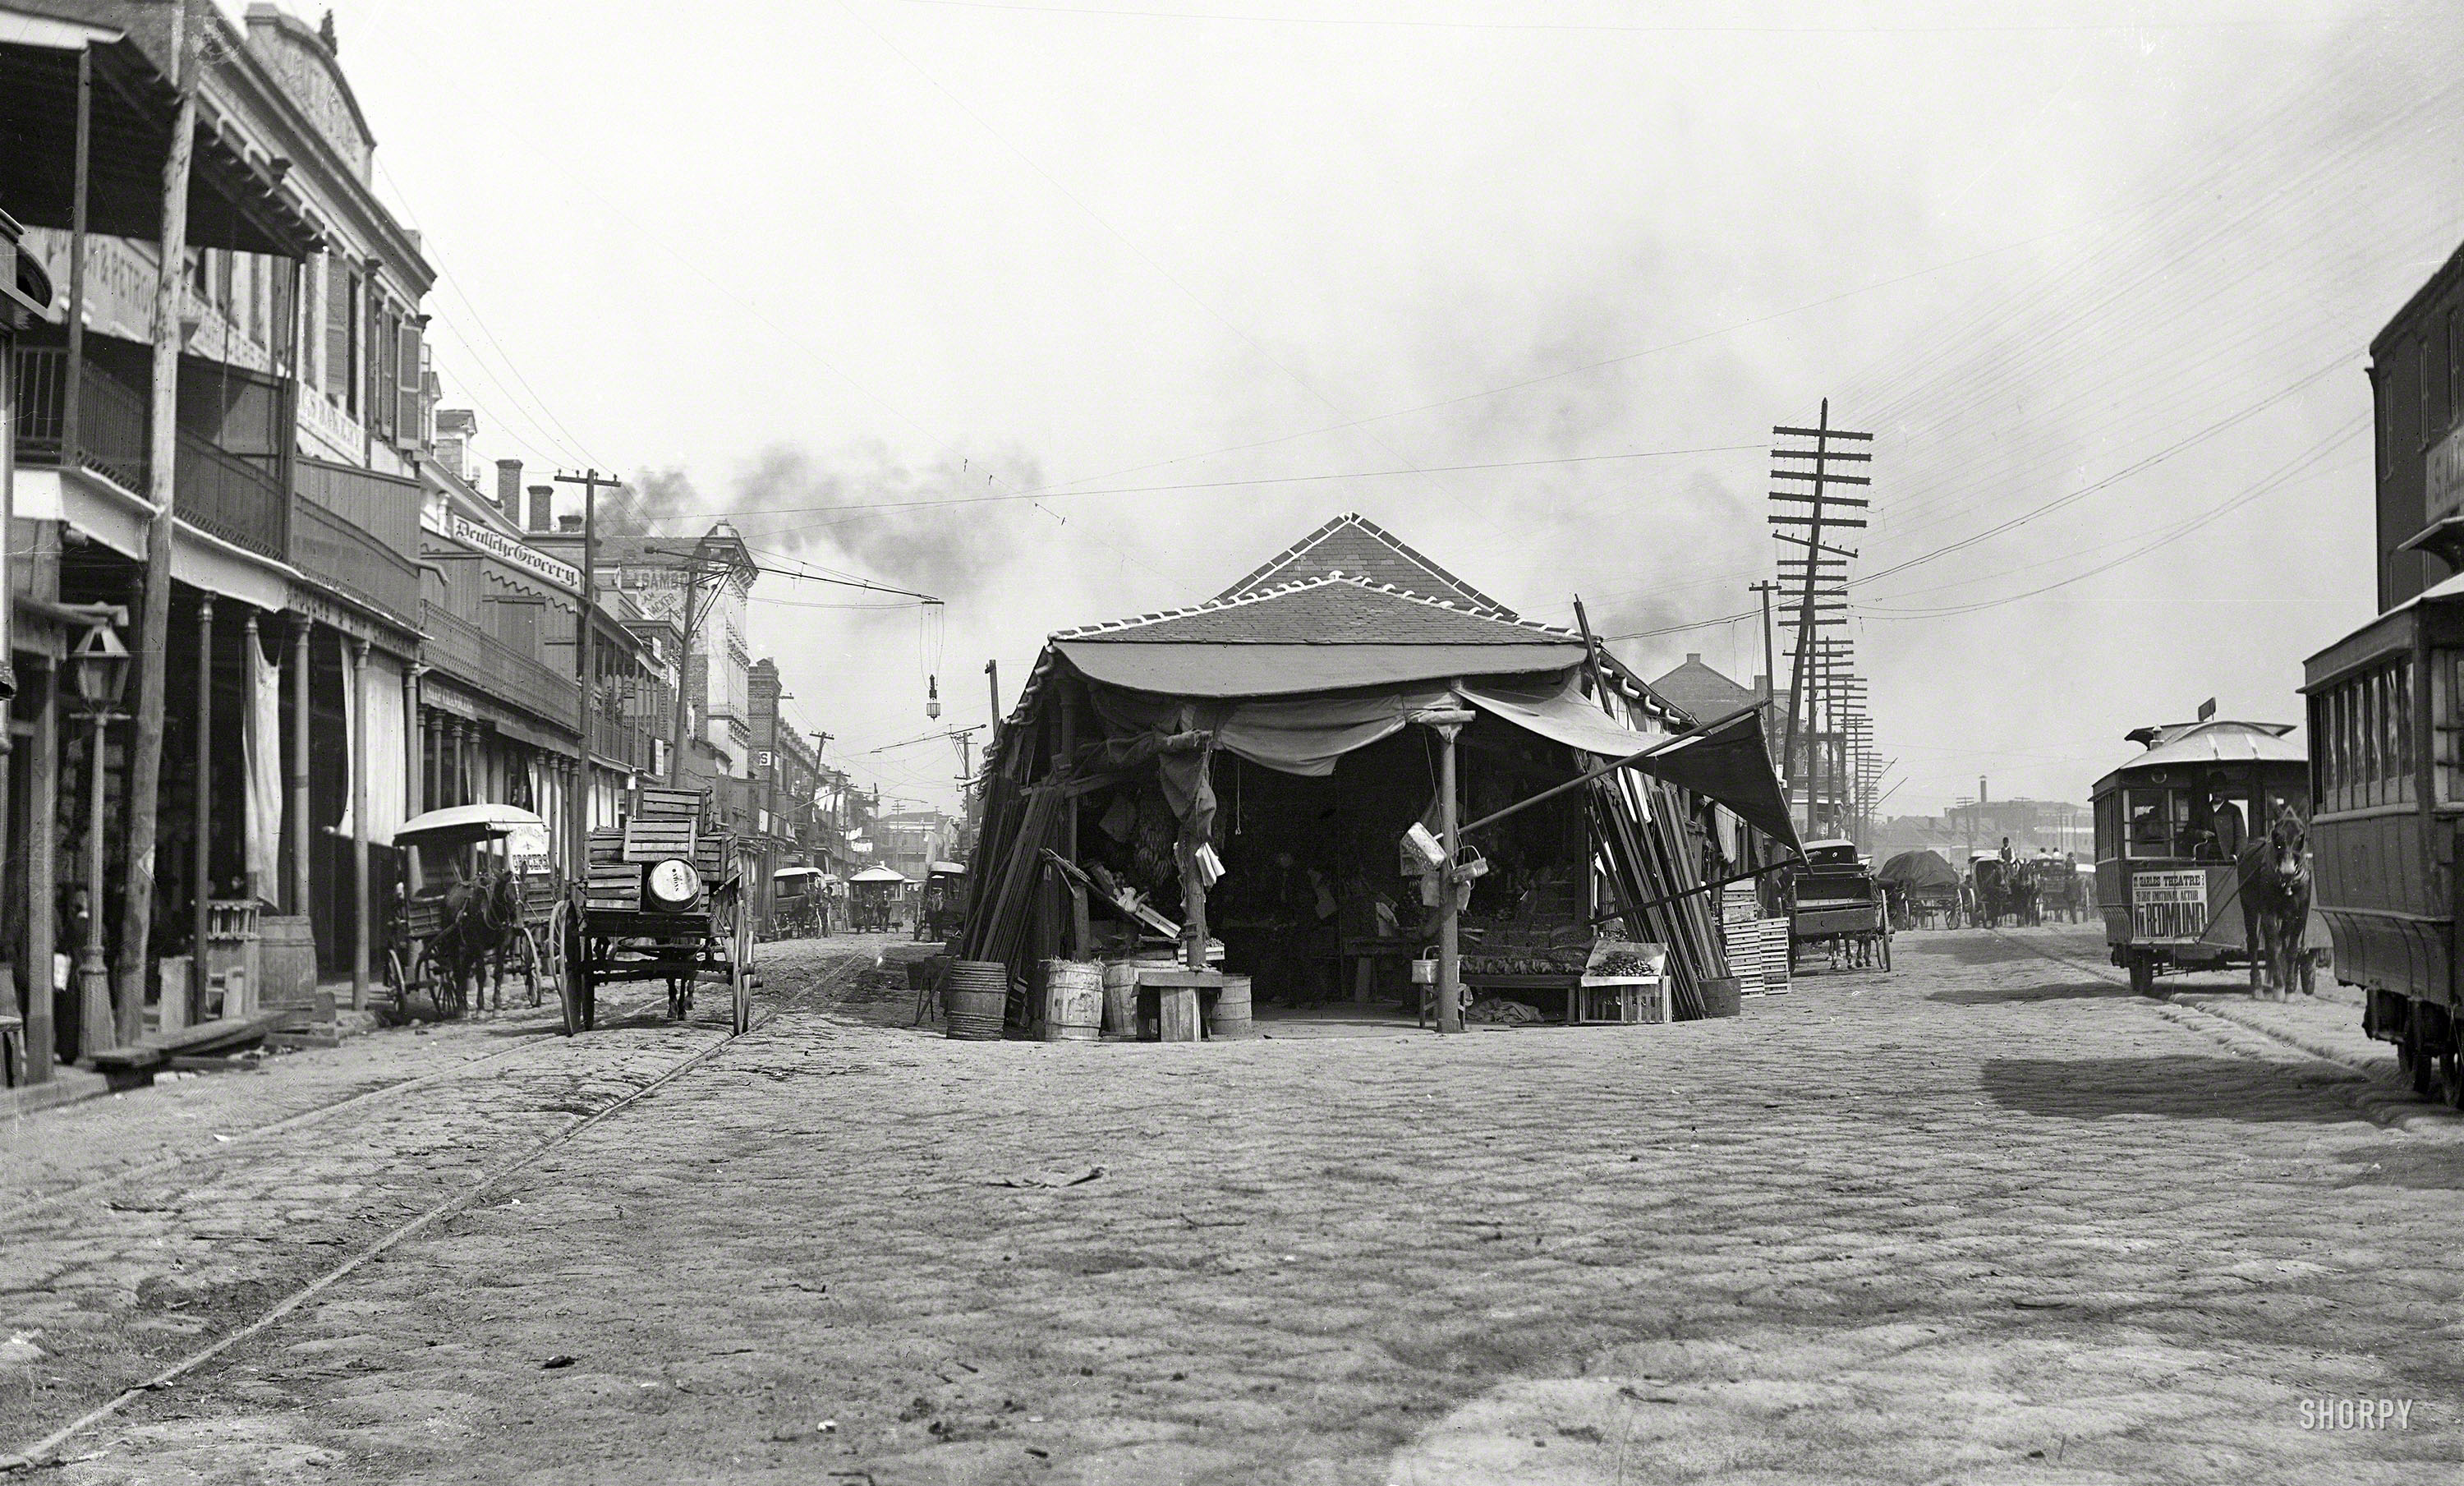 Circa 1890s. "The old French Market, New Orleans." Points of interest include many horsecars and an arc lamp on a boom. Ship Chandler's Grocer wagon and Deutsche Grocery at left. Photo by William Henry Jackson. View full size.